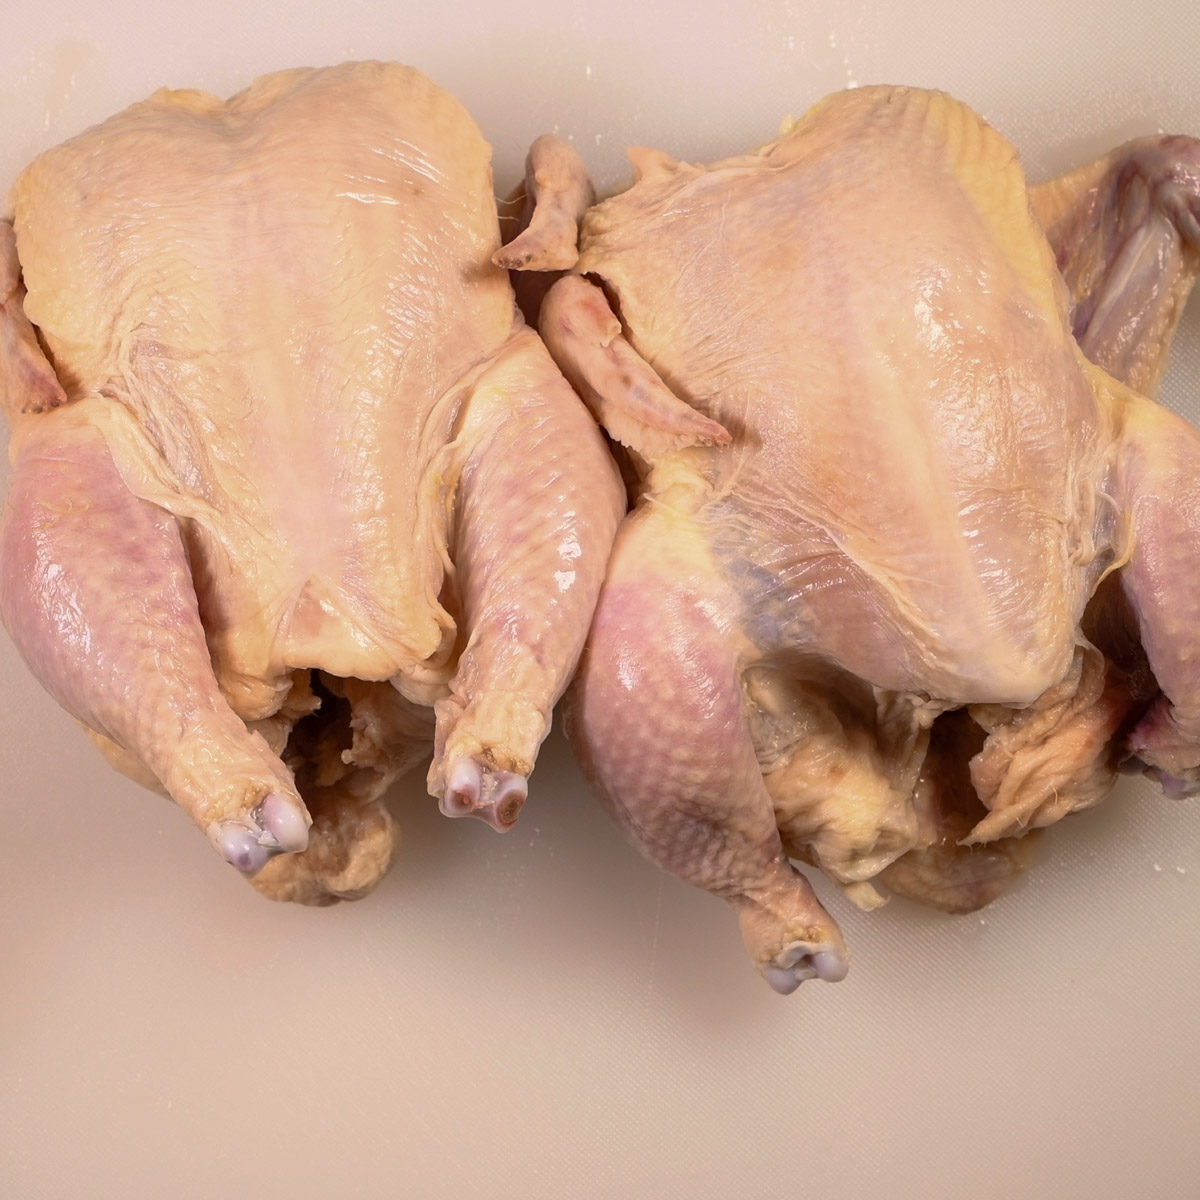 Prepare the Cornish hens by first wiping with a dry paper towel.